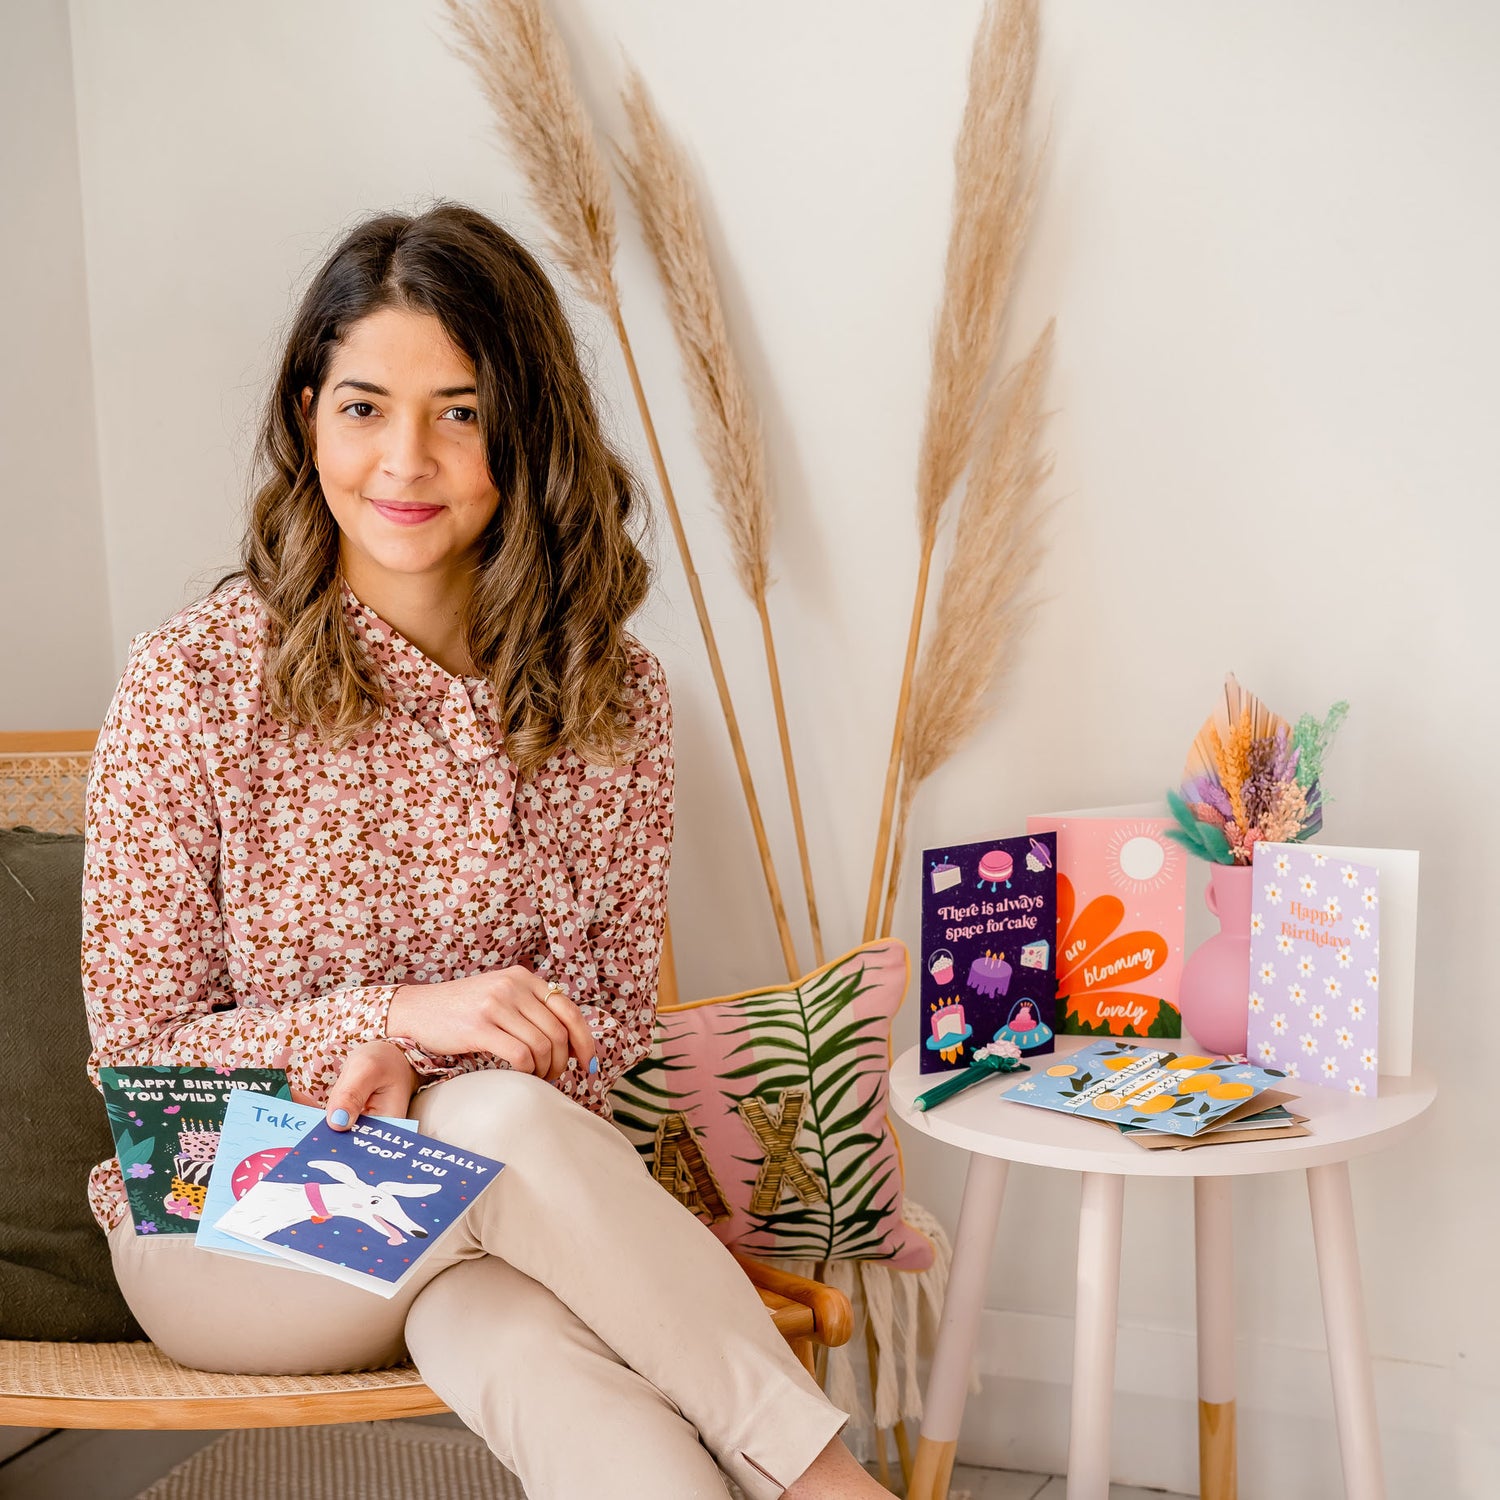 Founder of Gabi & Gaby, Gabi Maksimov sitting in a chair holding a selection of greeting cards